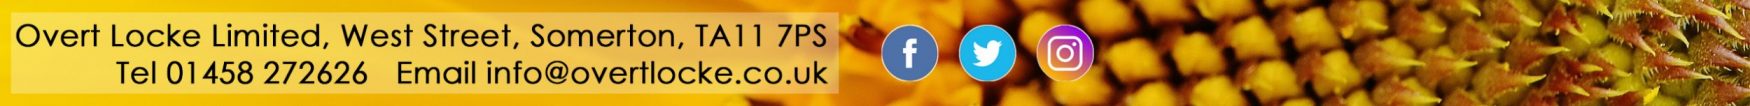 Sunflower footer with social media icons